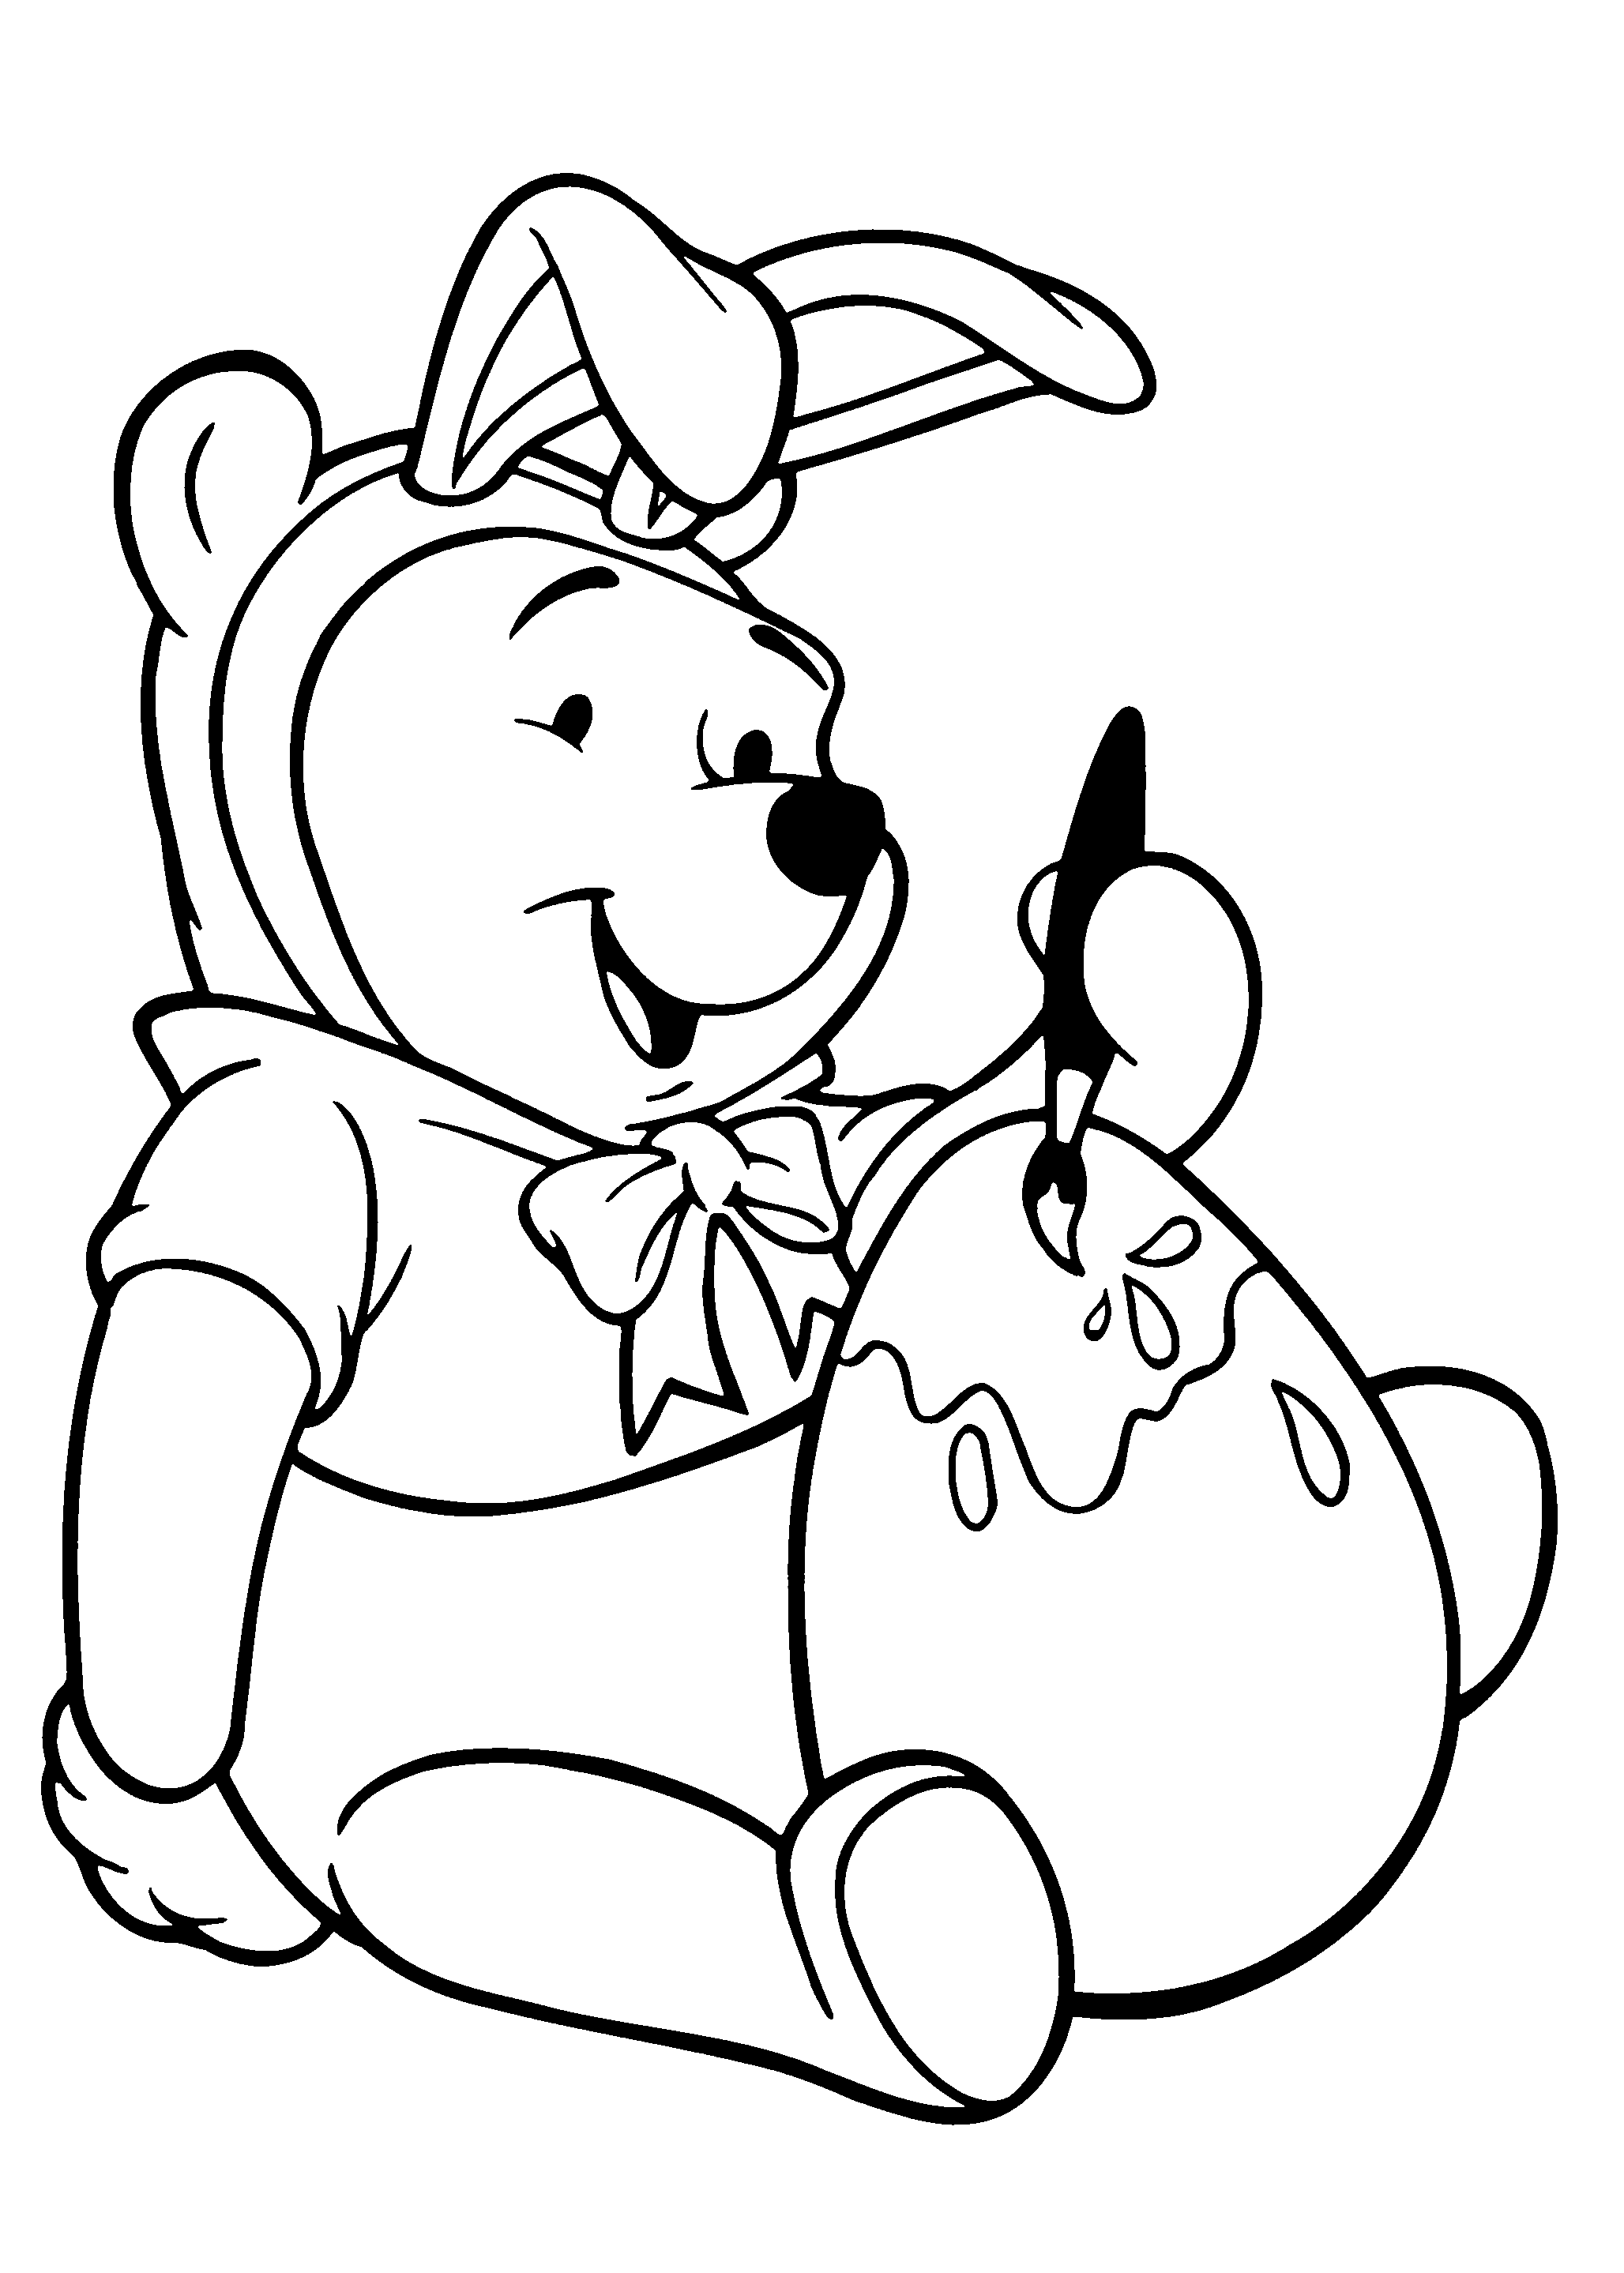 Baby Winnie The Pooh Draw On Easter Egg Coloring Page